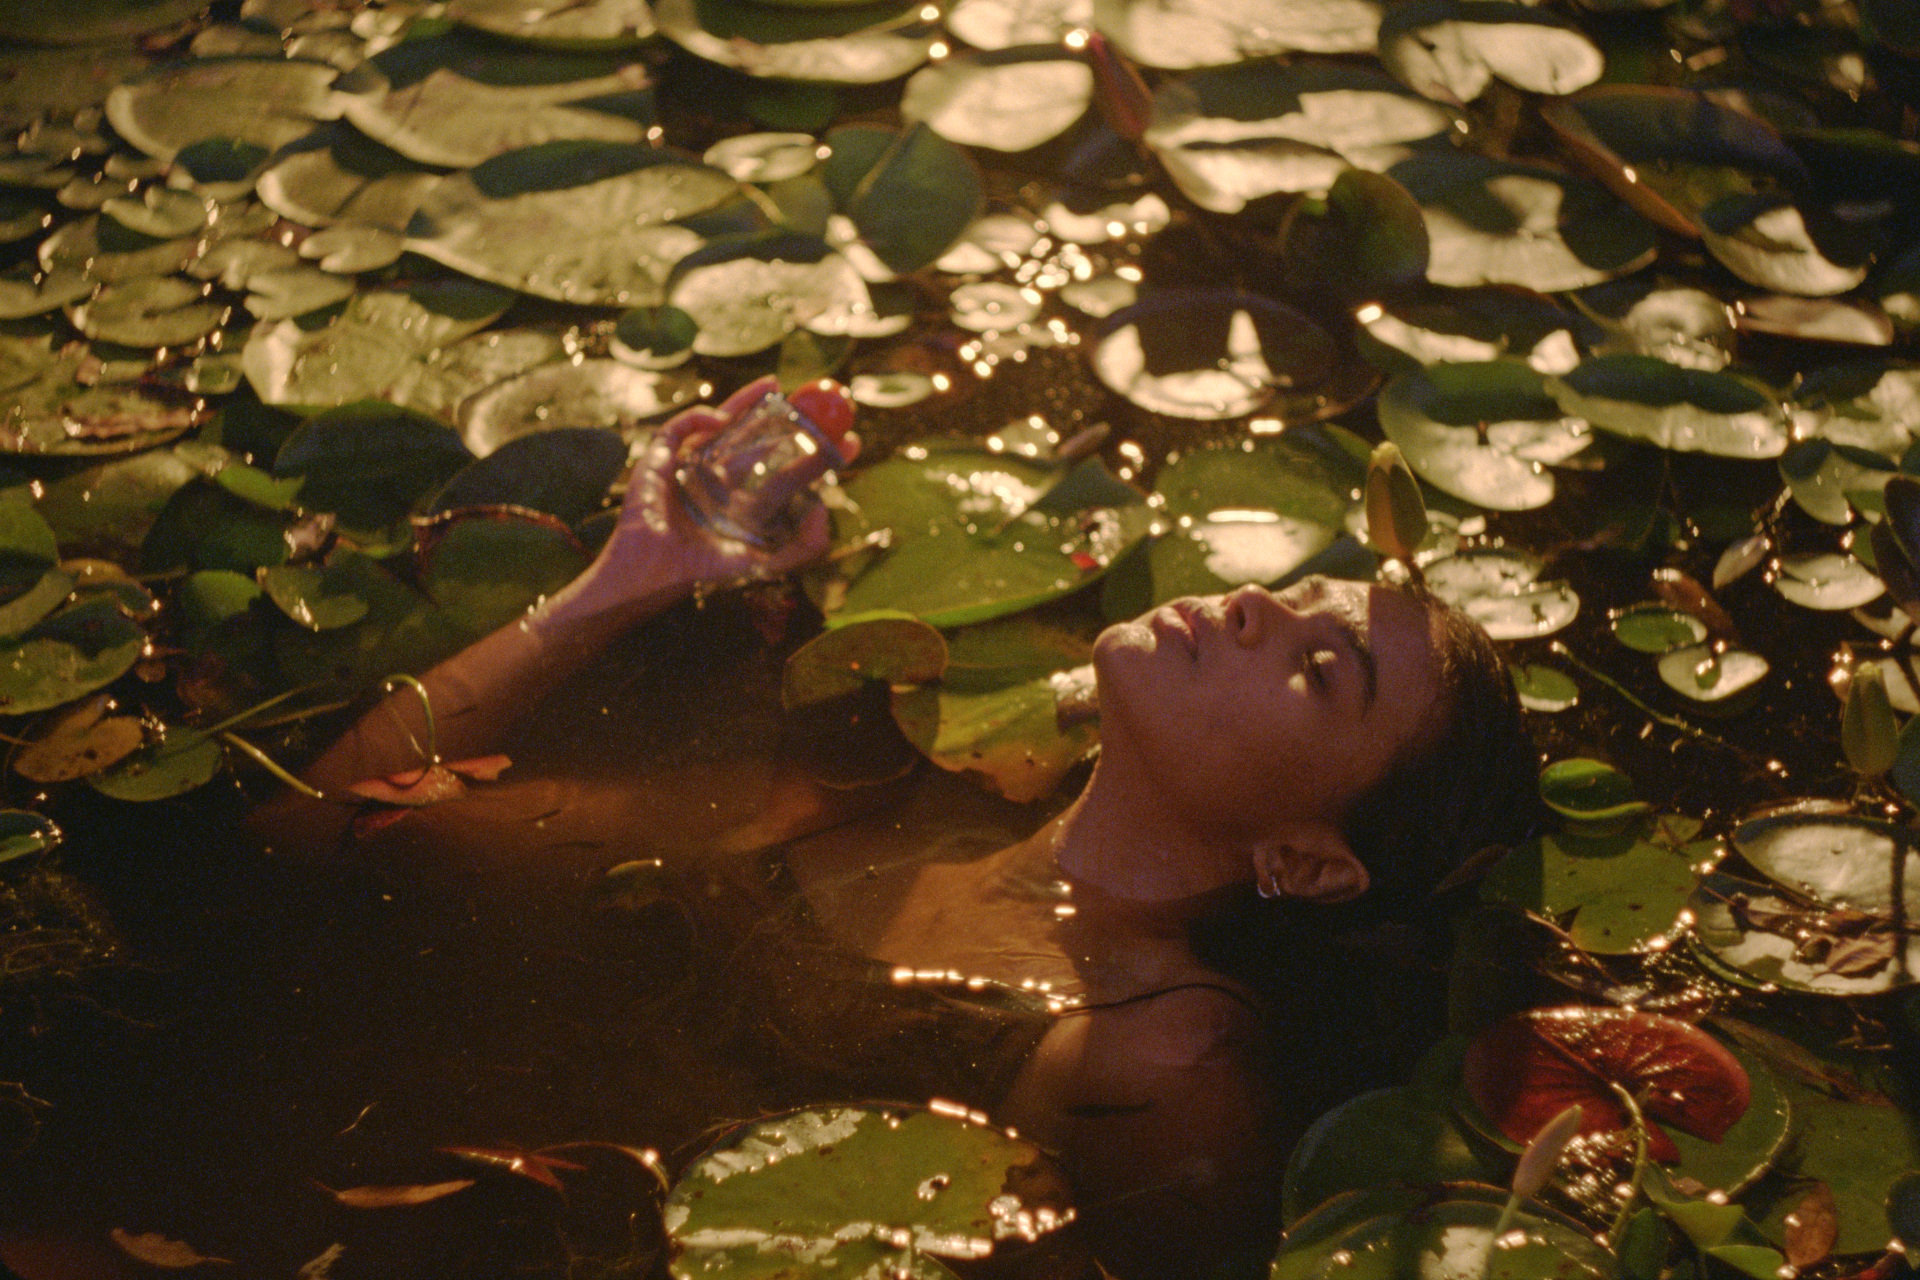 Woman in water and lily pads holding perfume bottle